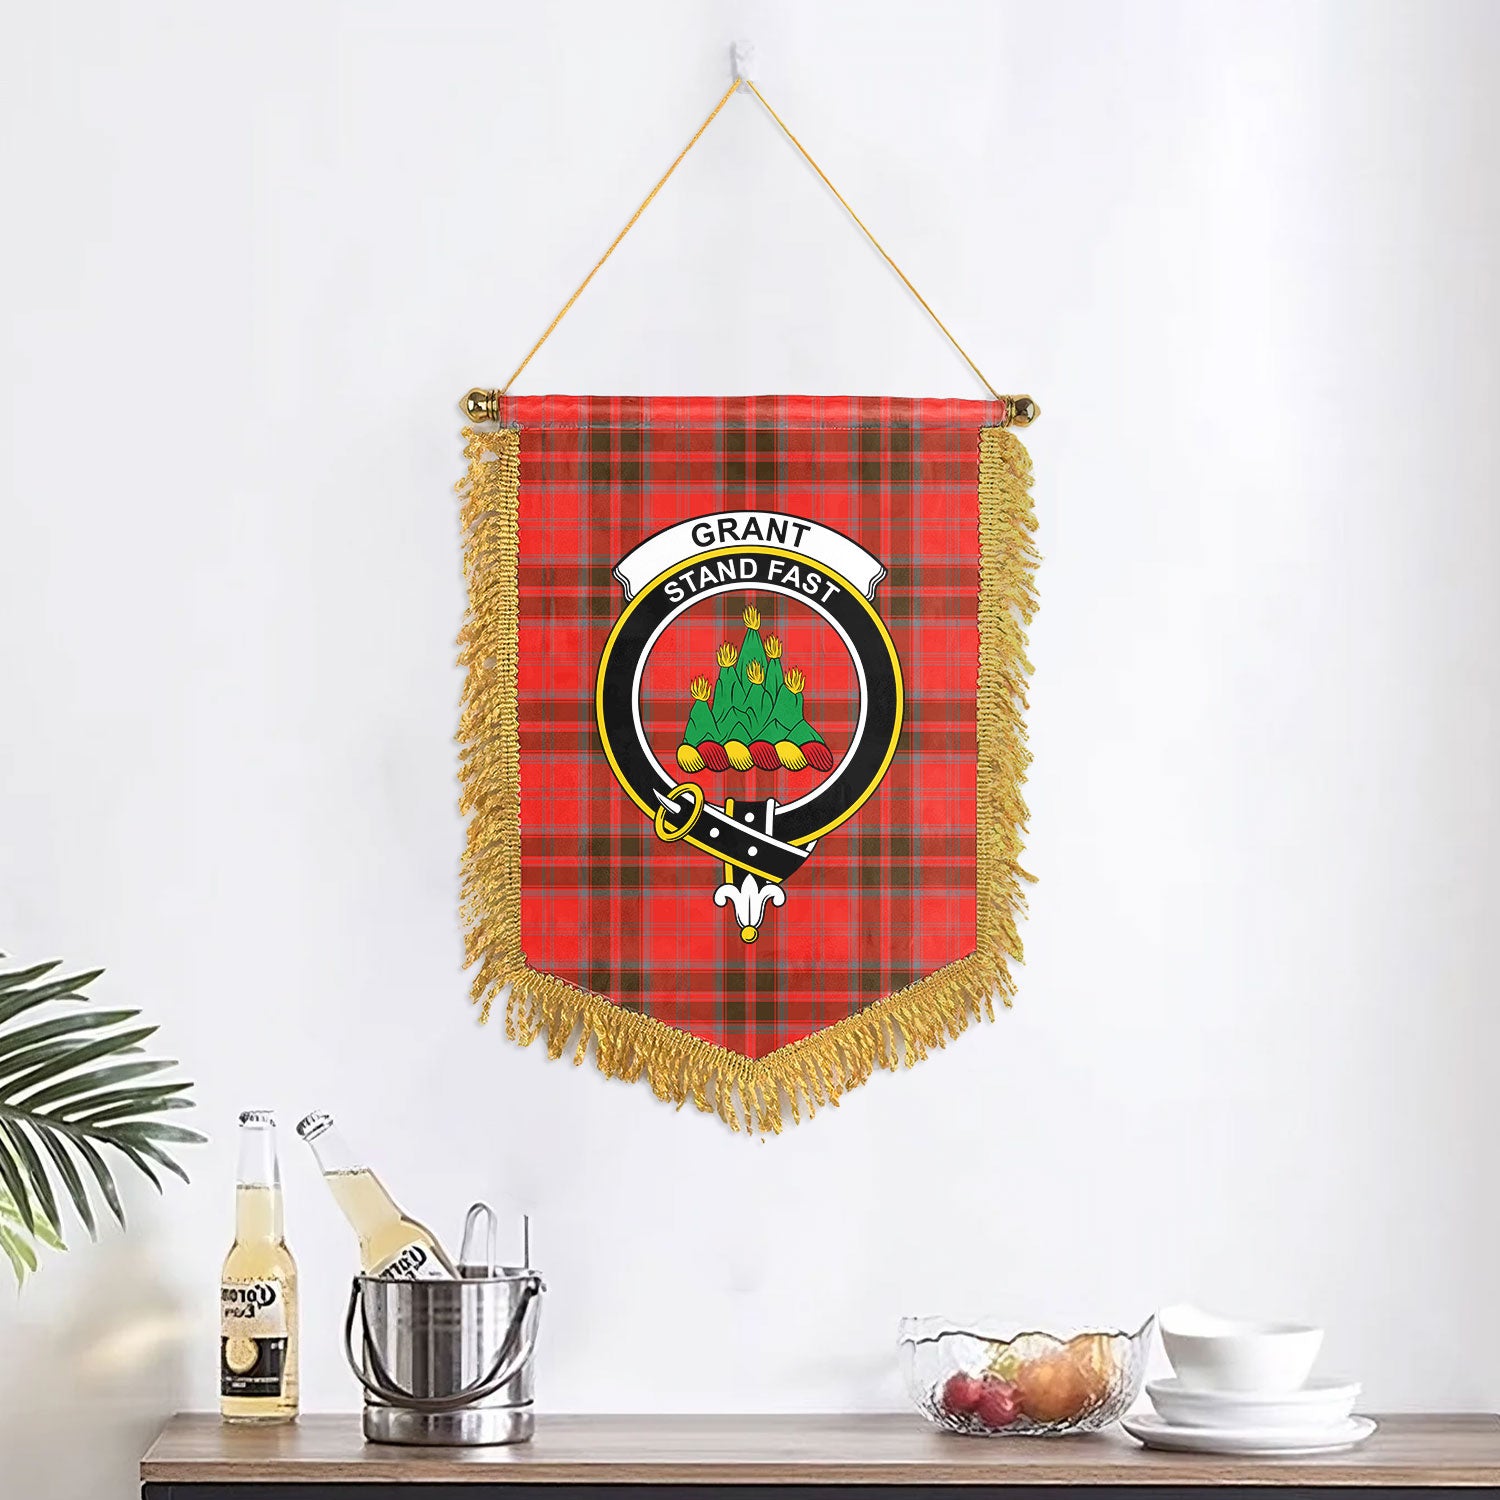 Grant Weathered Tartan Crest Wall Hanging Banner